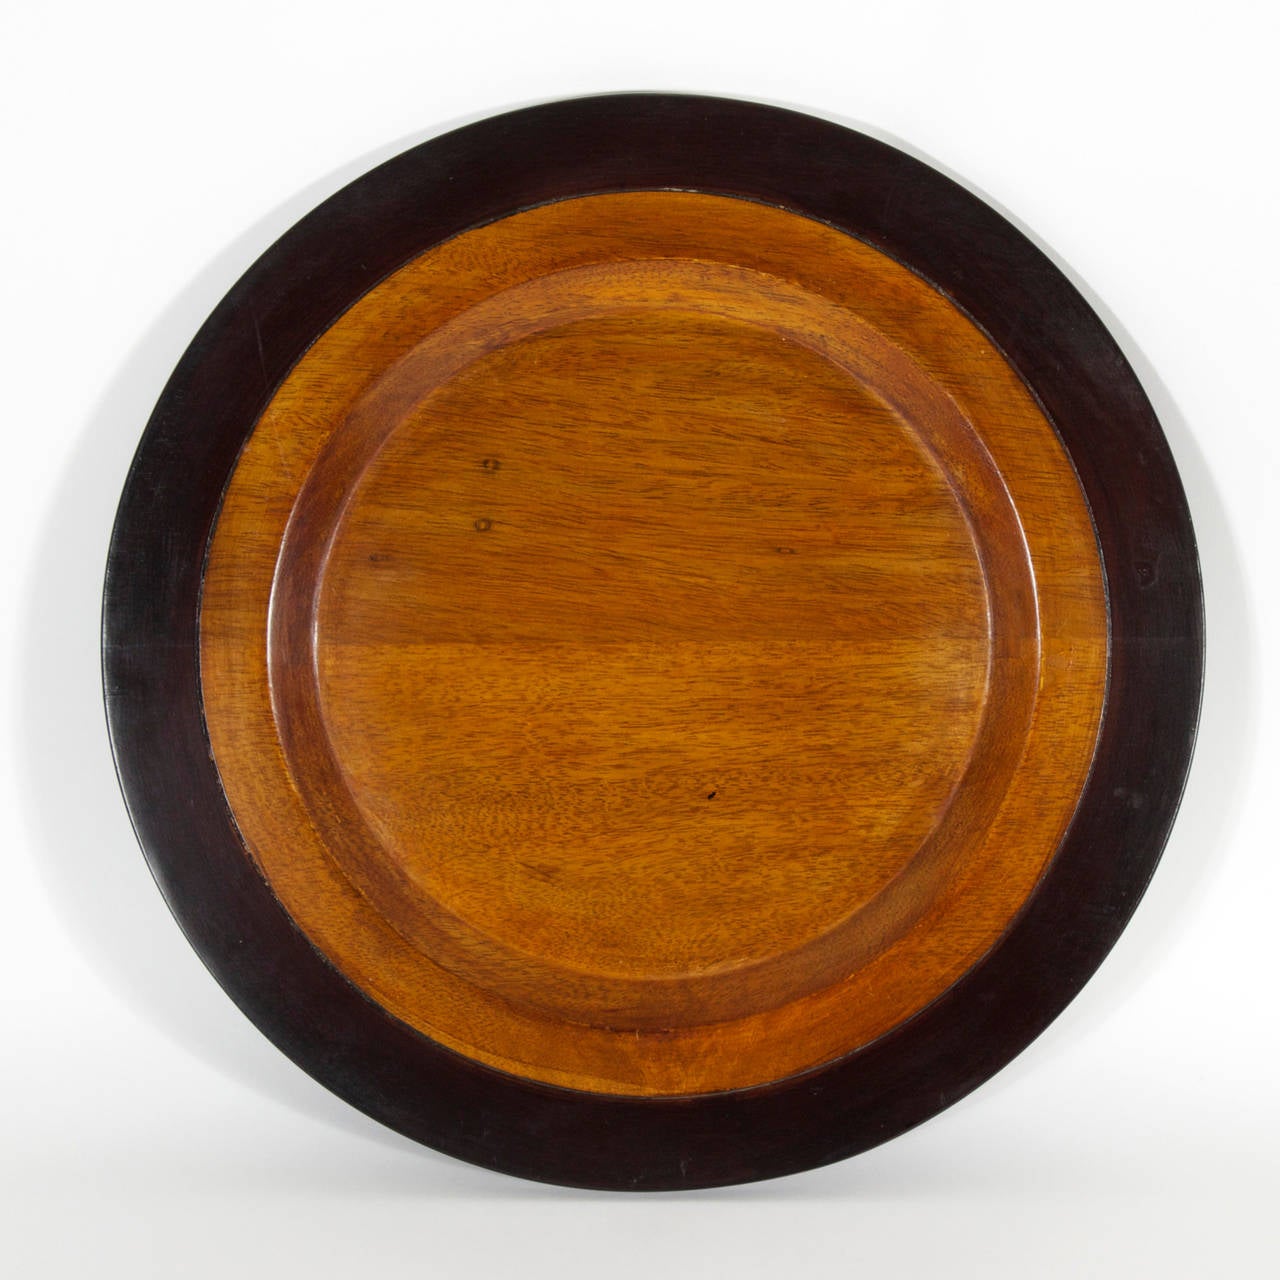 A set six mahogany charger or service plates with ebonized borders. Set a warm tropical mood to an intimate lunch or dinner. Newly polished.